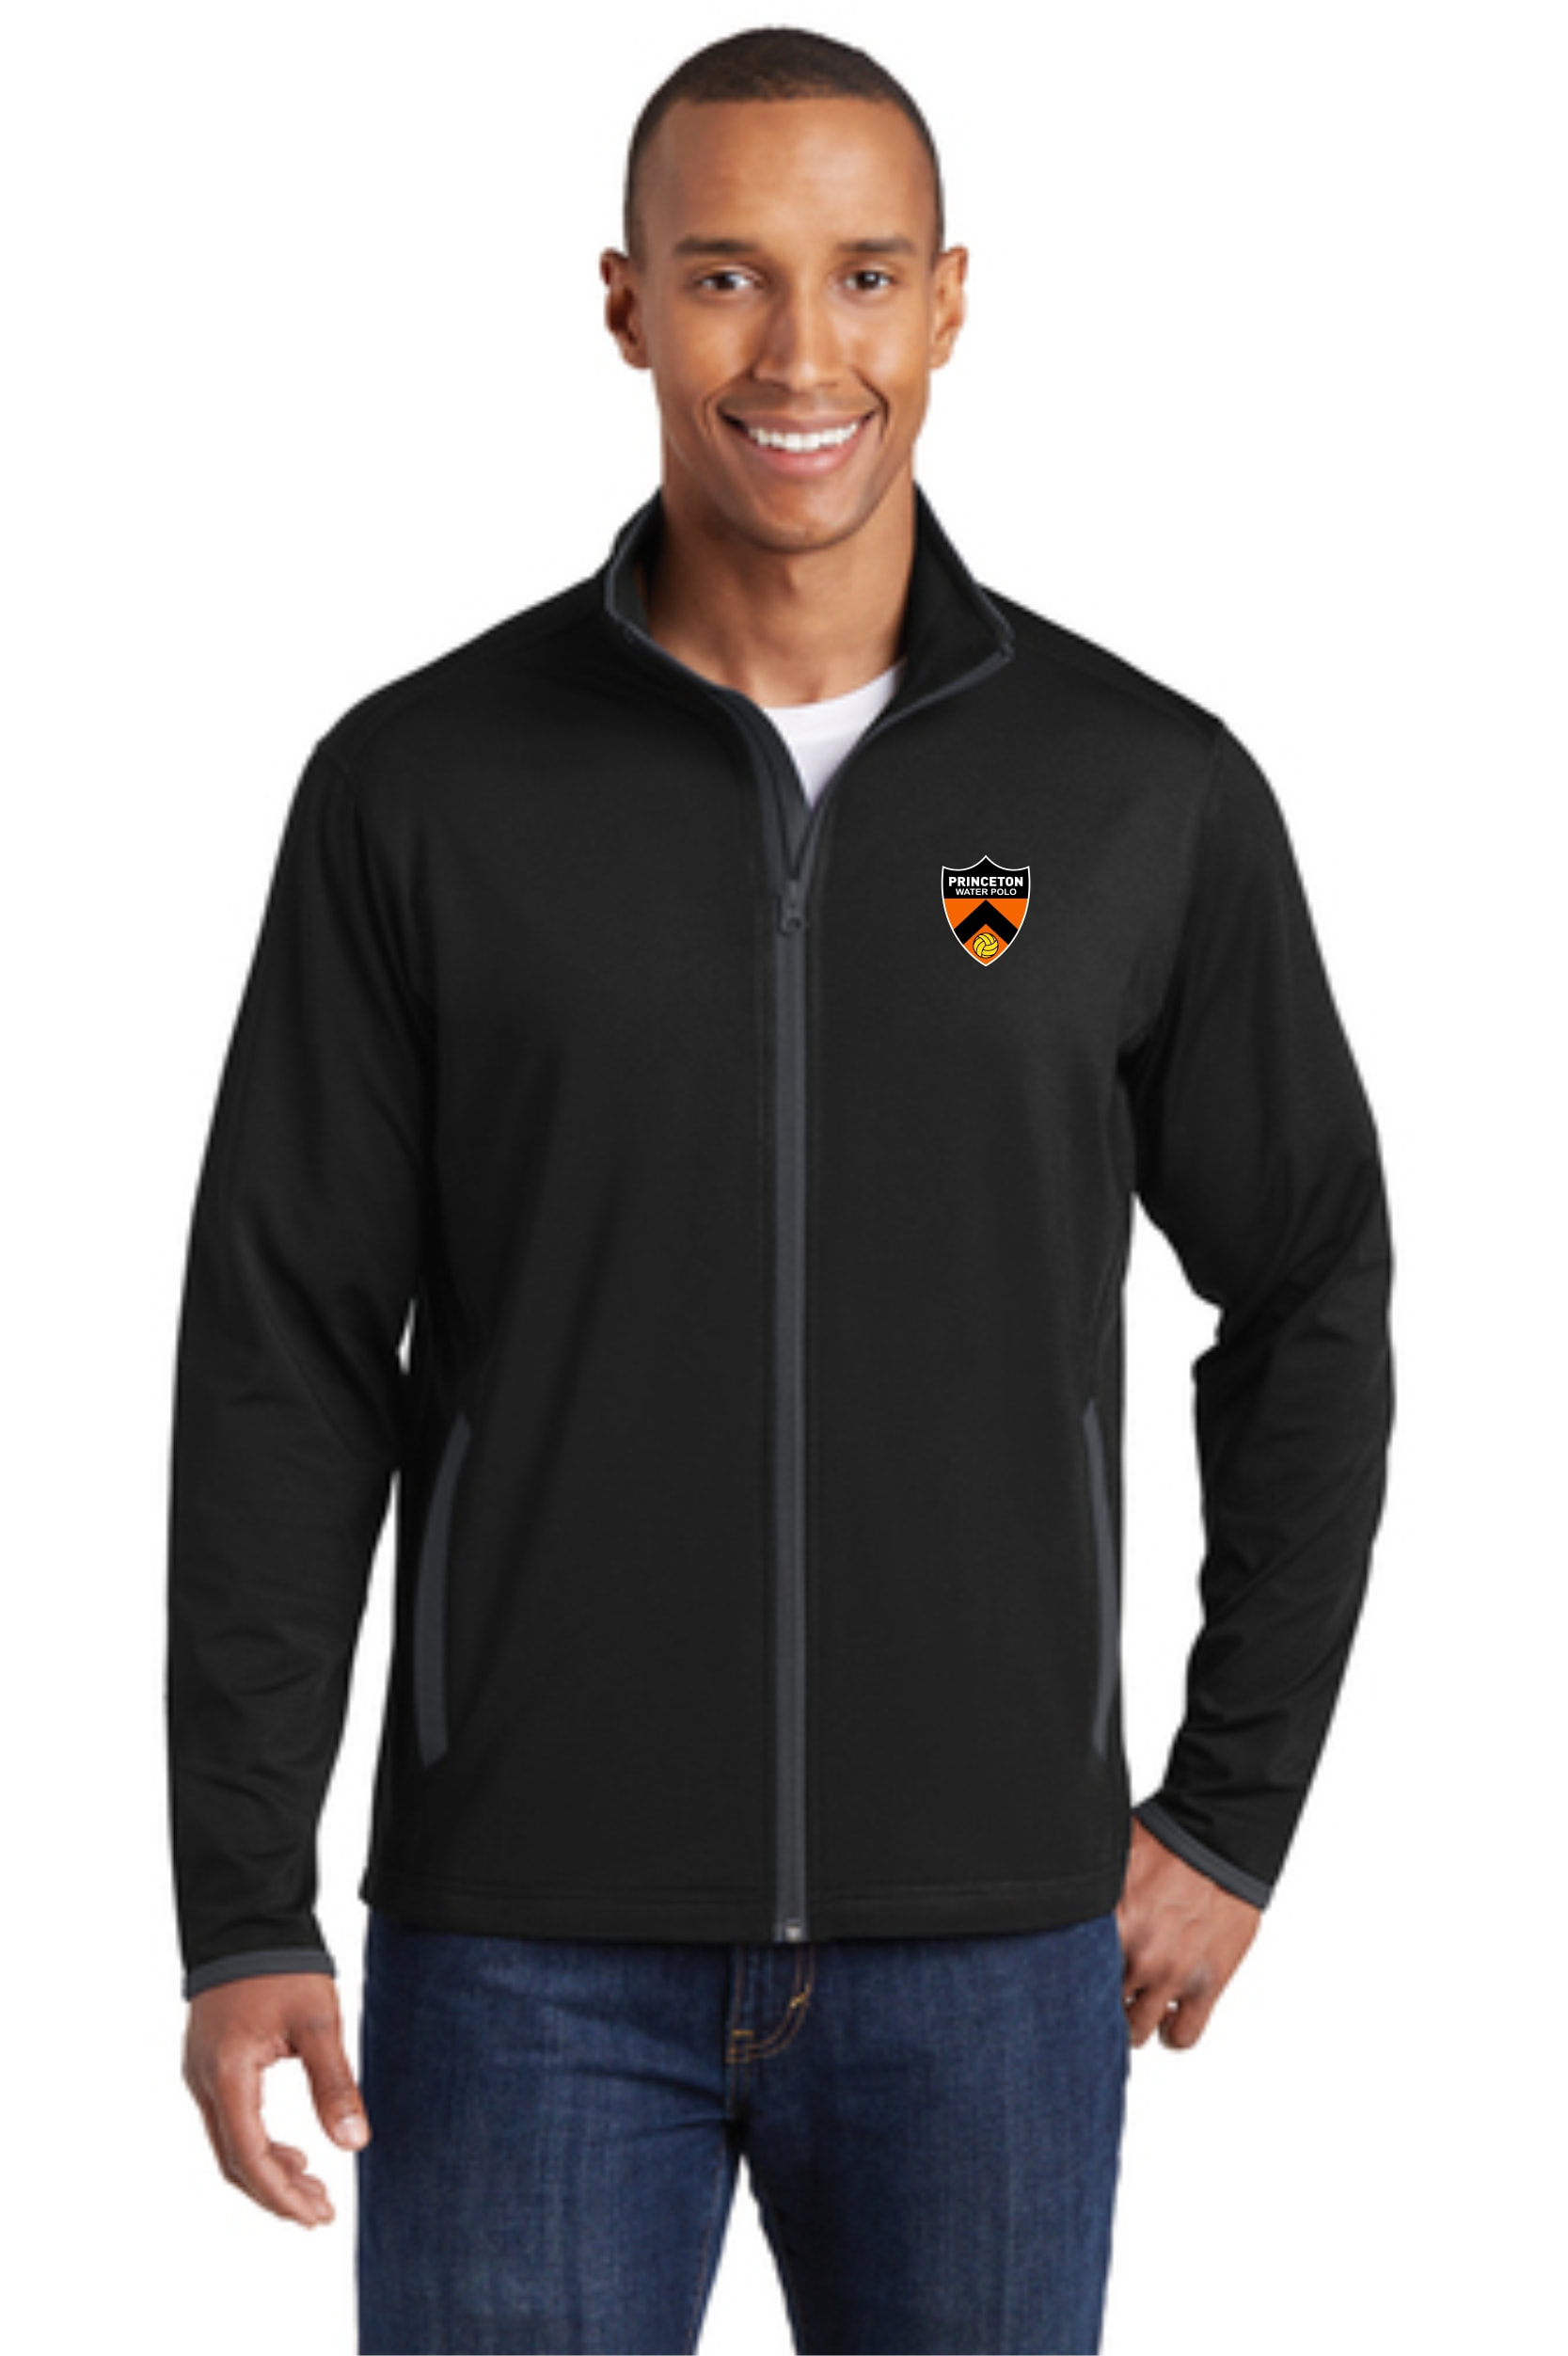 Princeton Water Polo Contrast Full Zip Jacket